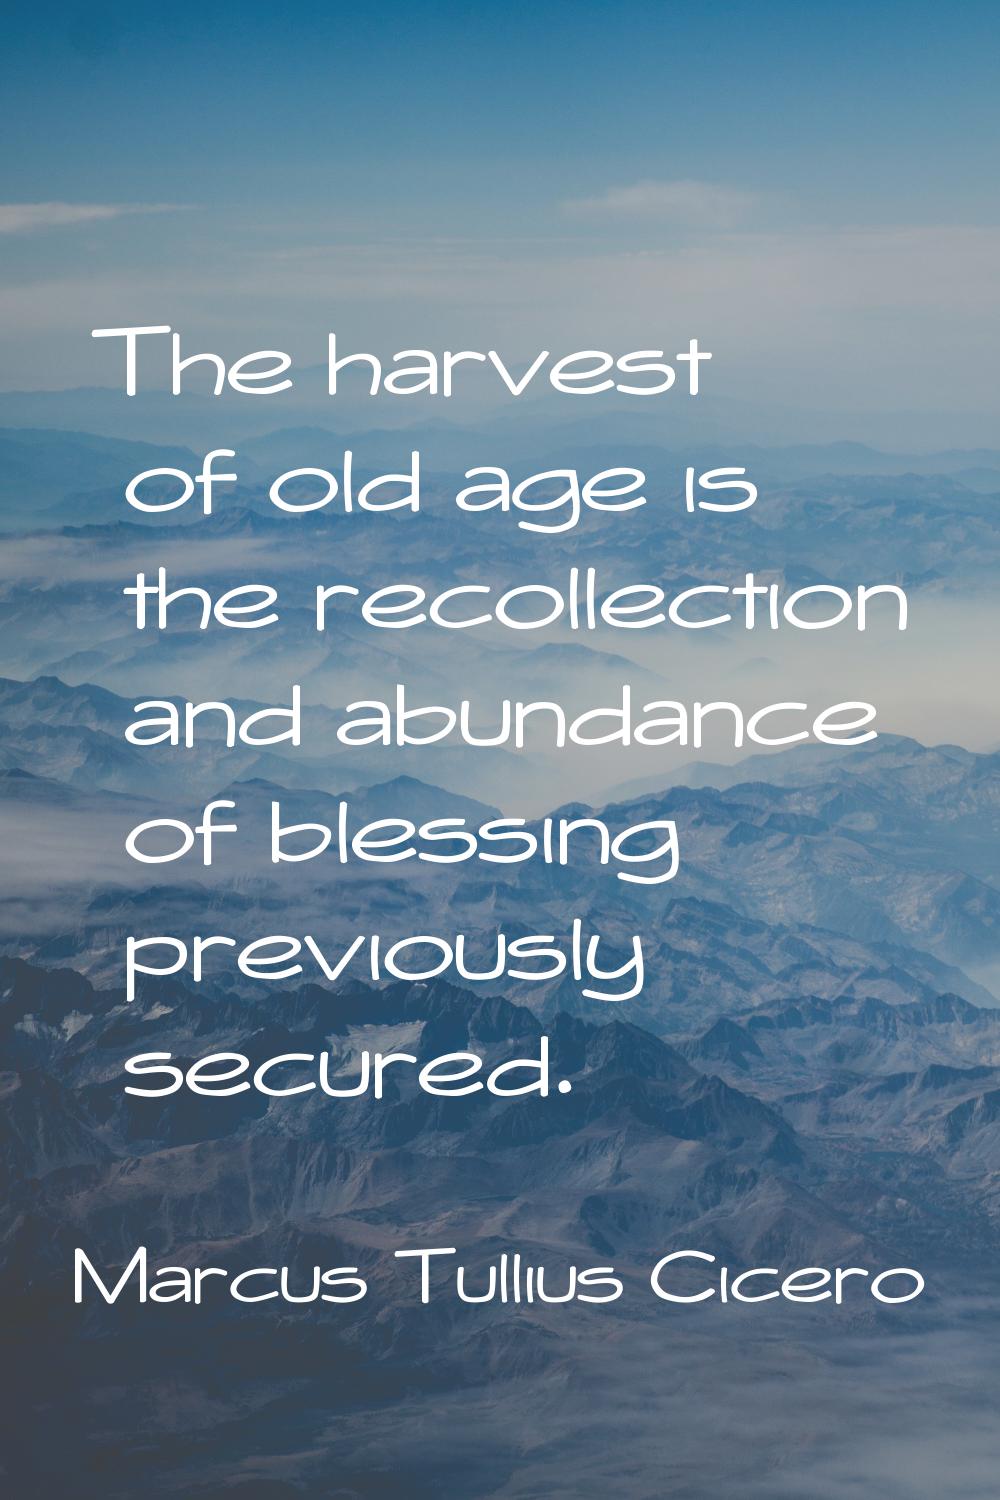 The harvest of old age is the recollection and abundance of blessing previously secured.